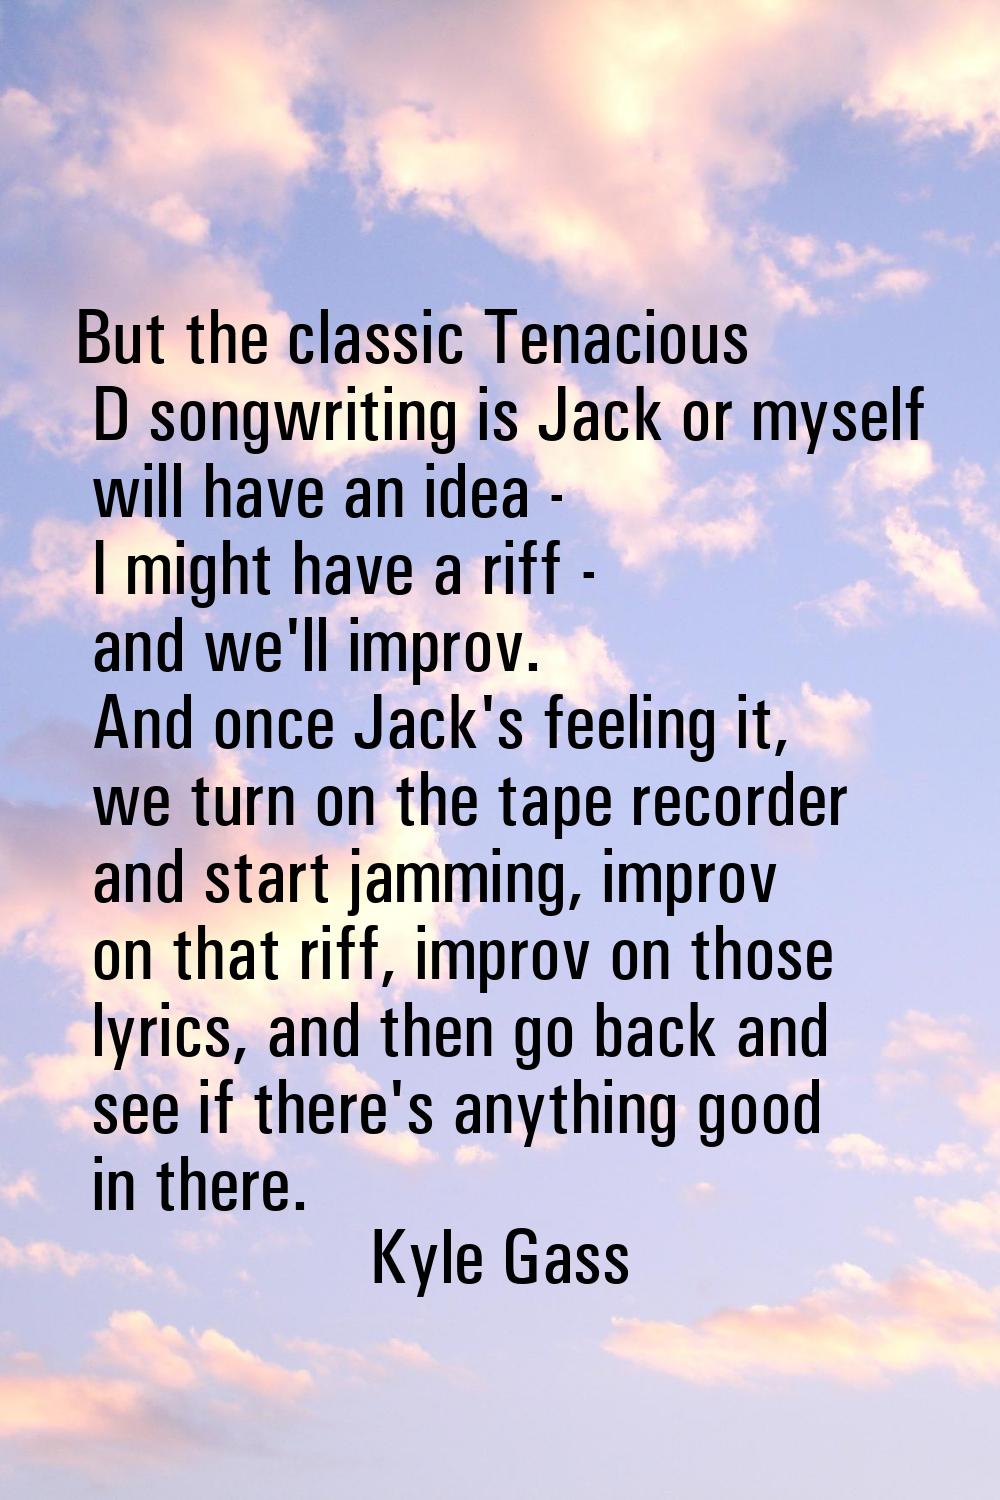 But the classic Tenacious D songwriting is Jack or myself will have an idea - I might have a riff -